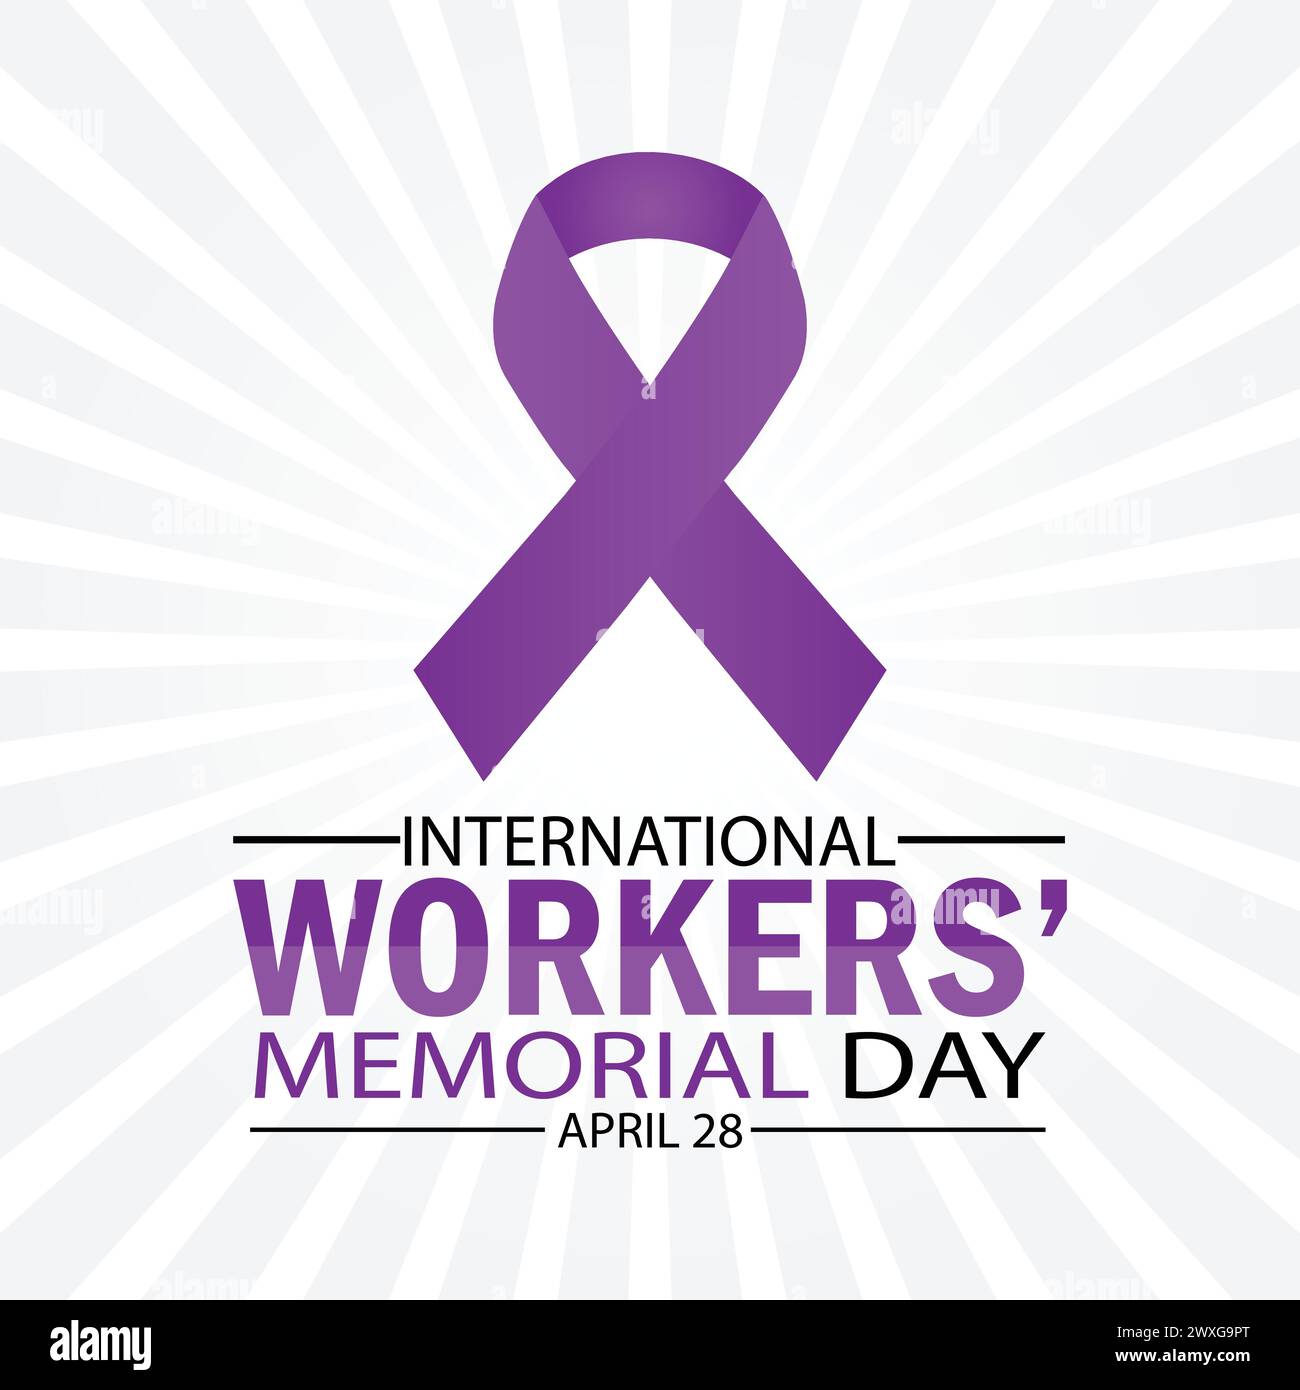 International Workers Memorial Day wallpaper with shapes and typography. International Workers Memorial Day, background Stock Vector